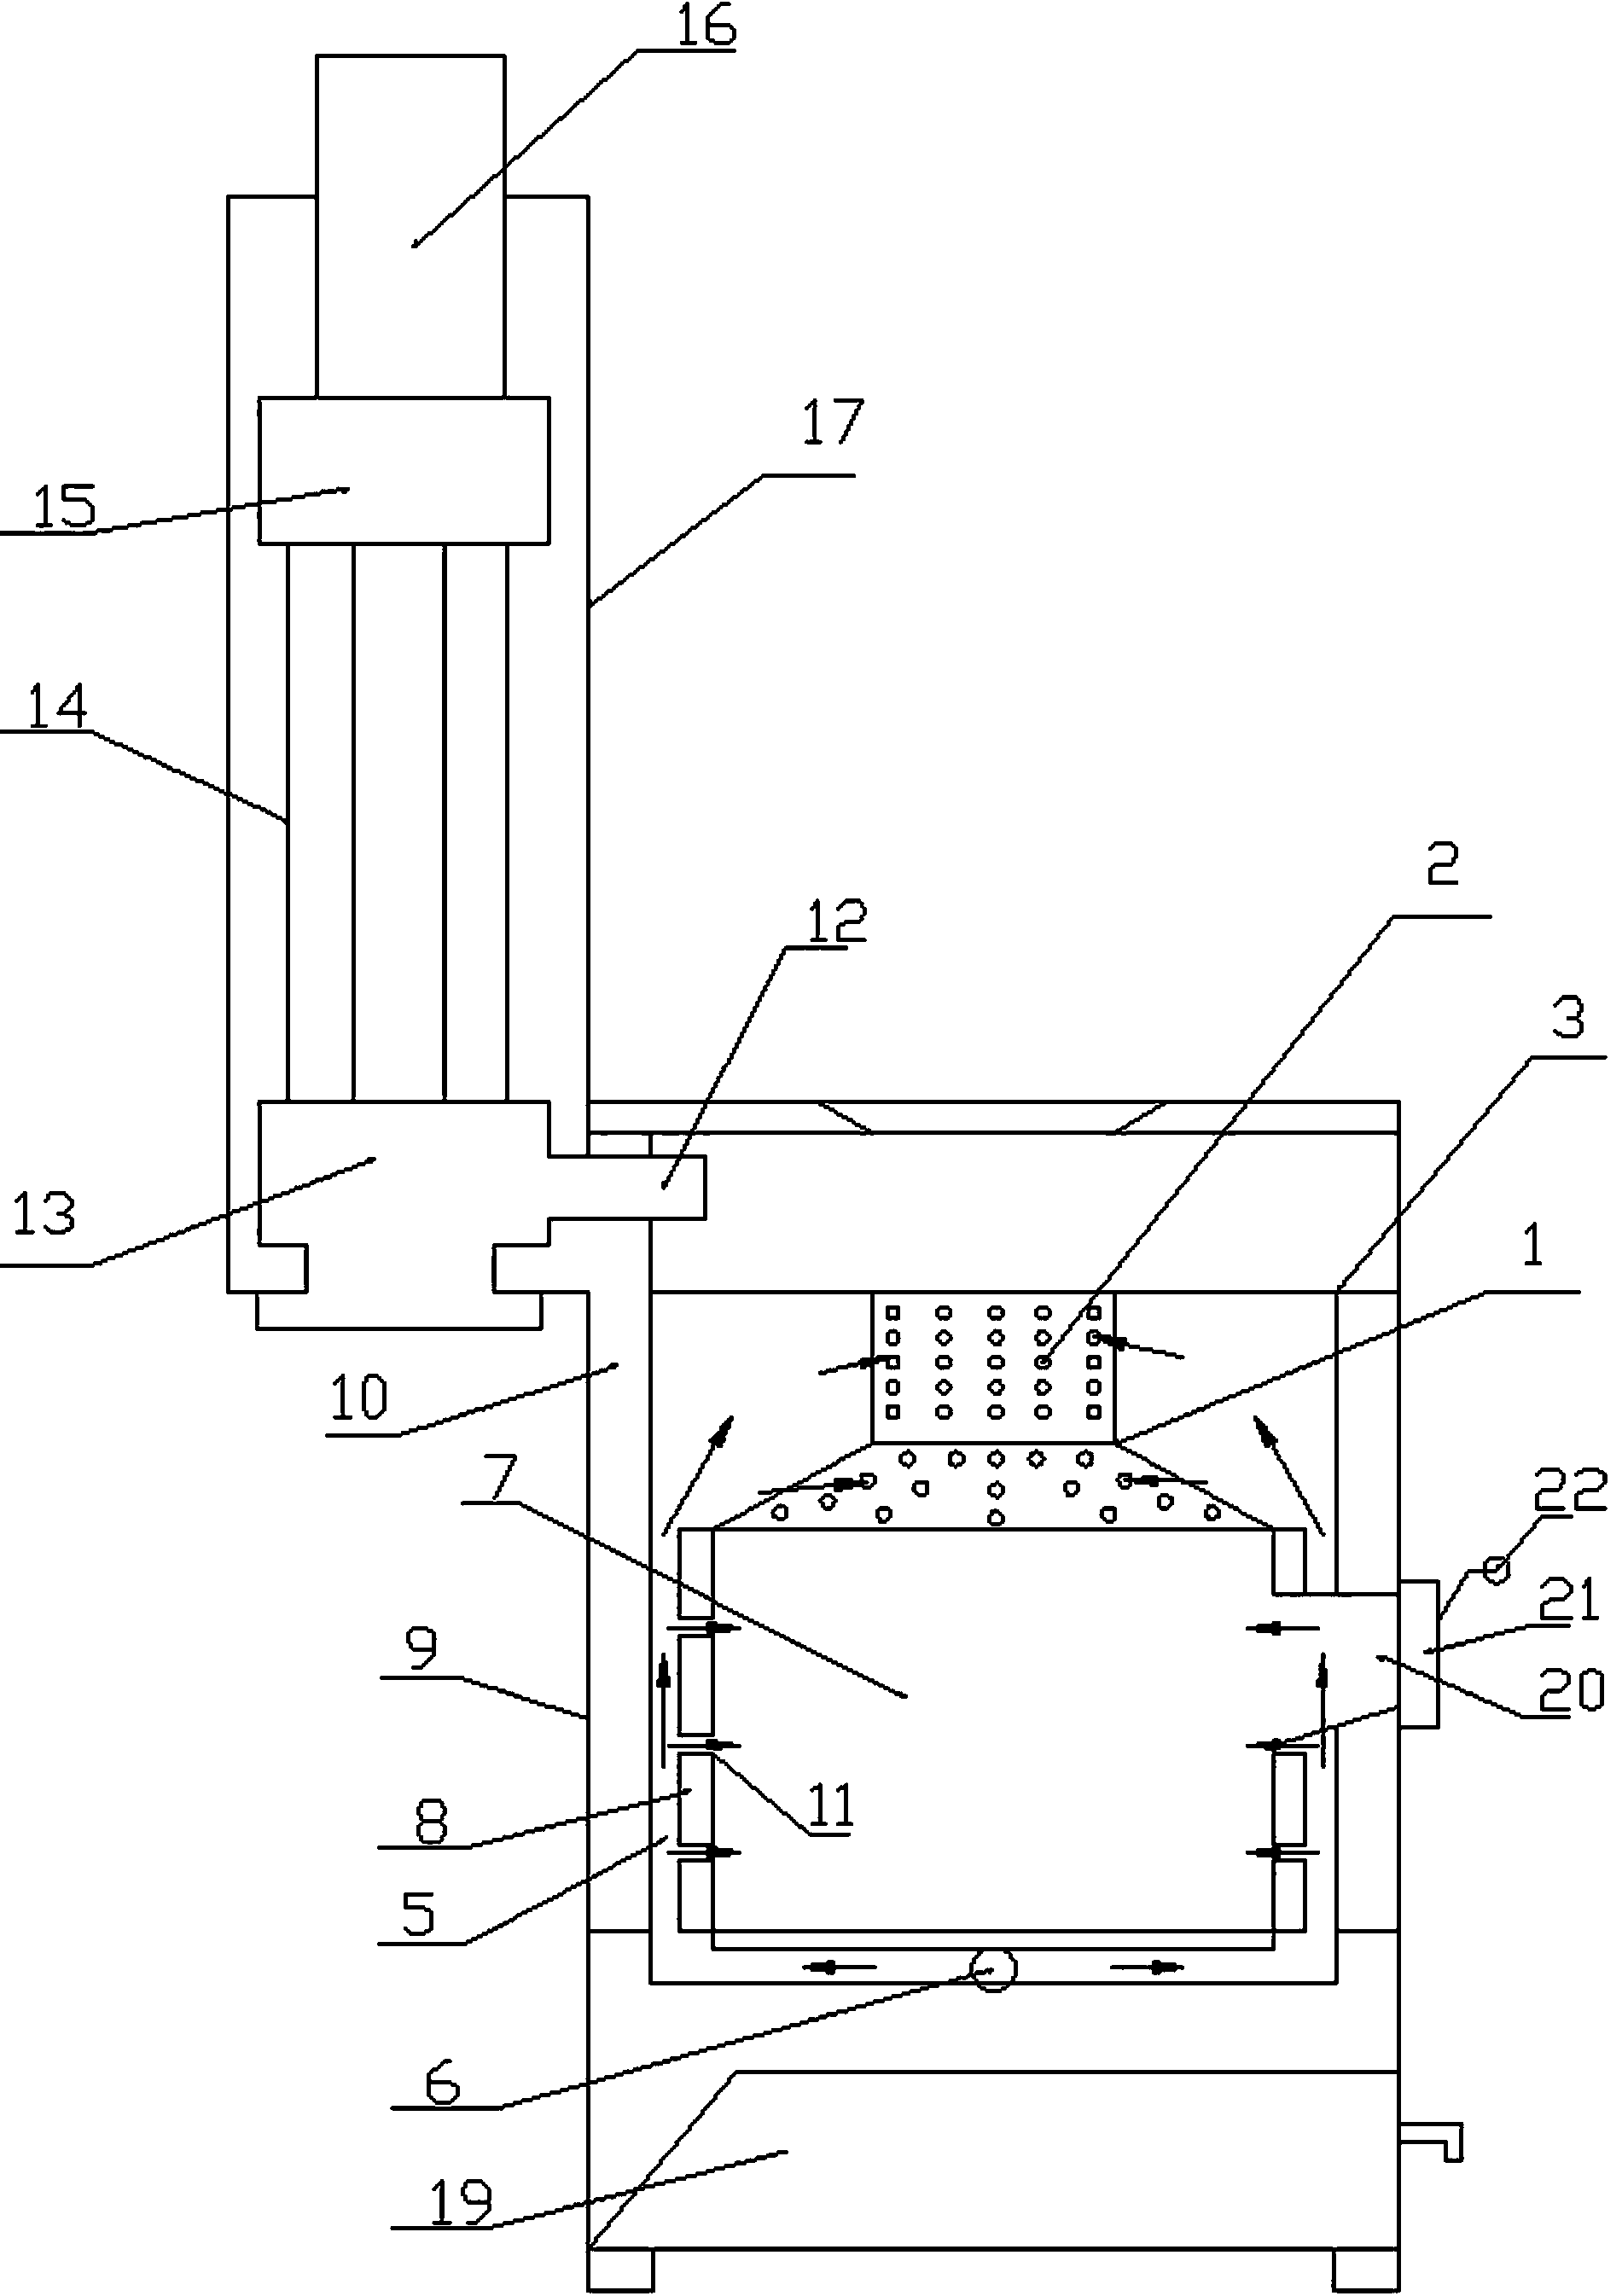 Novel gasification combustion device